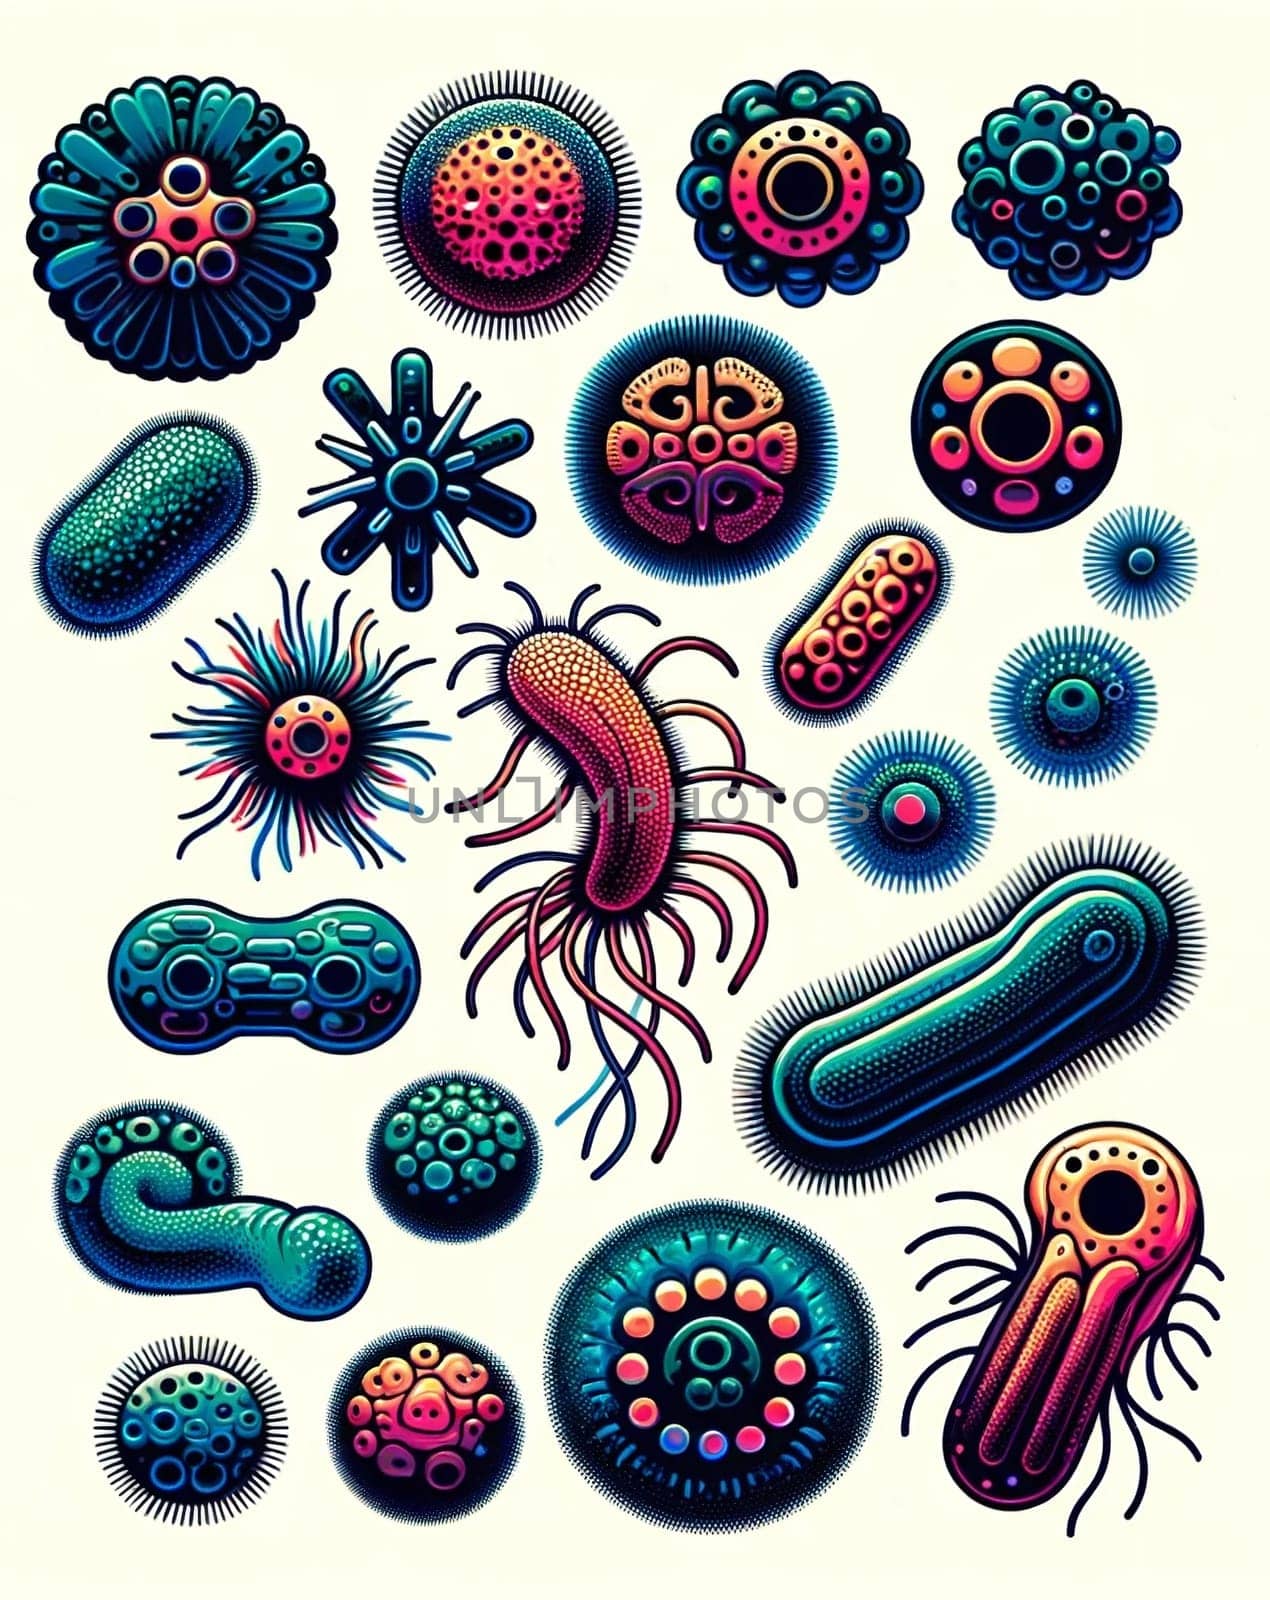 Fantasy Microcosm: AI-Generated Illustration of Whimsical Microbes and Cells on White by Crevis